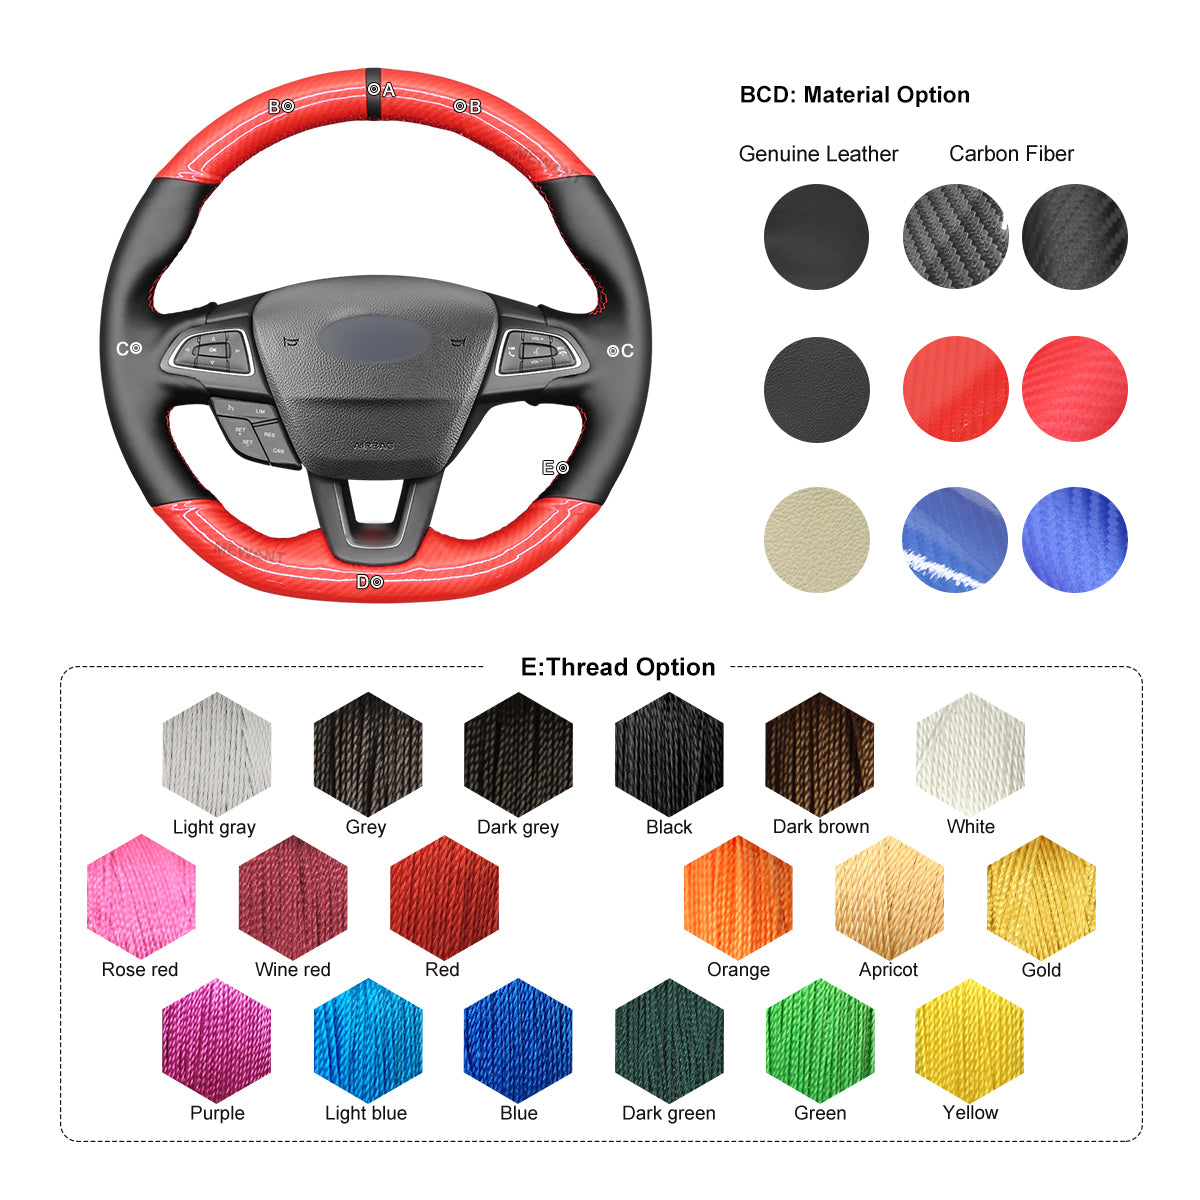 MEWANT Hand Stitch Sewing Black Leather Suede Carbon Fiber Car Steering Wheel Cover for Ford Focus (RS | ST | ST-Line)  Kuga (ST-Line) Ecosport (ST-Line)